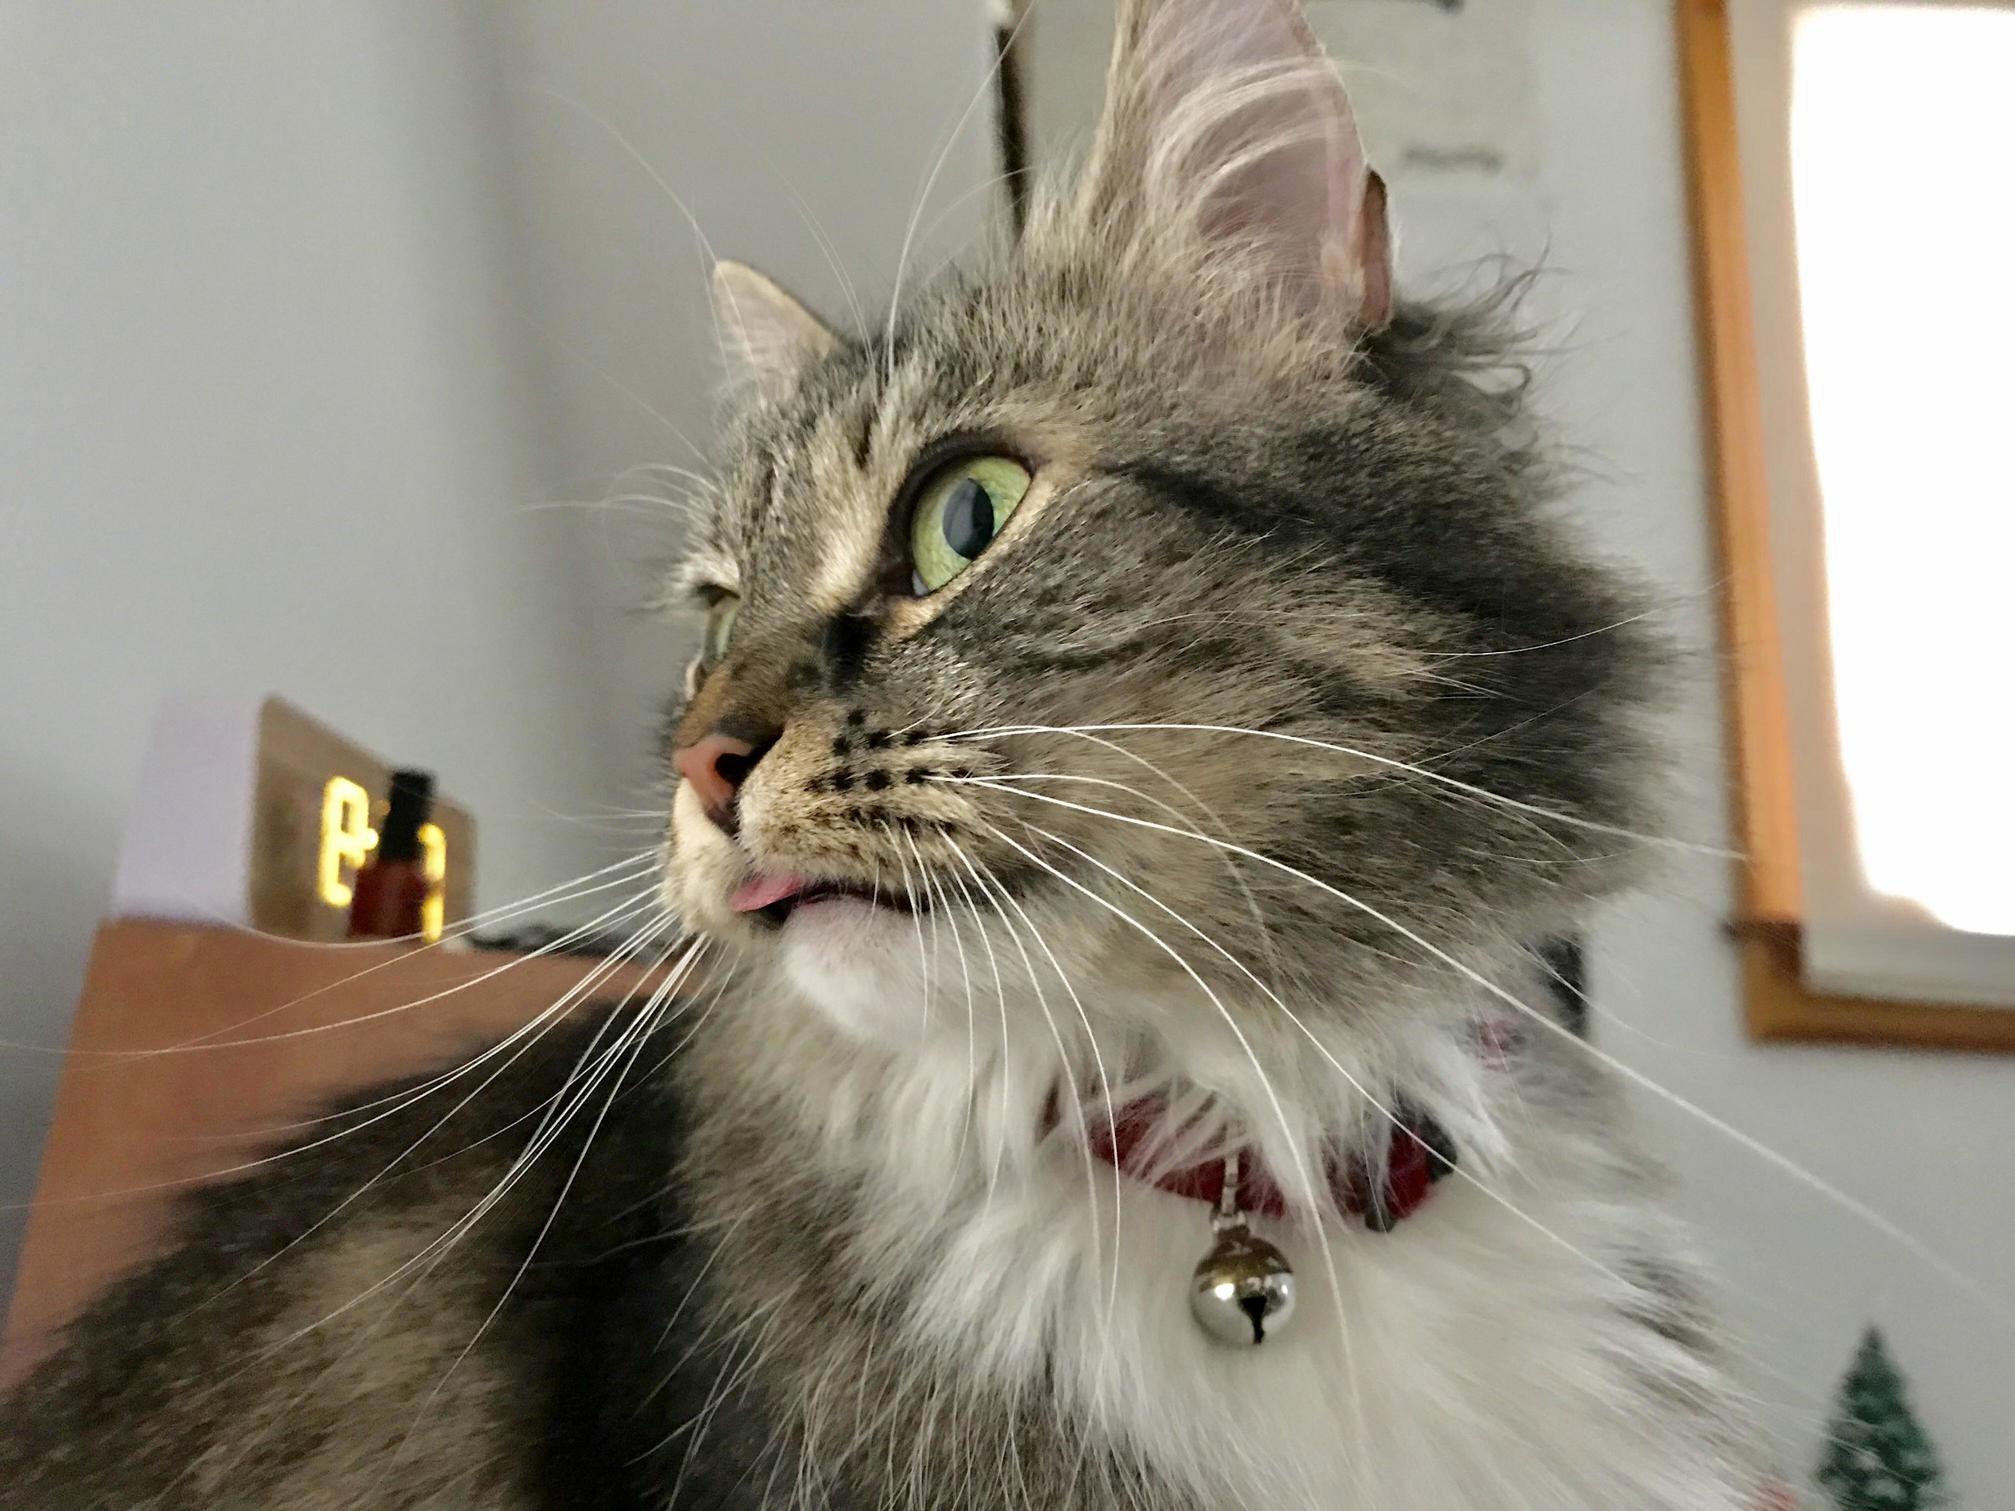 Cleo and her blep while looking at a squirrel